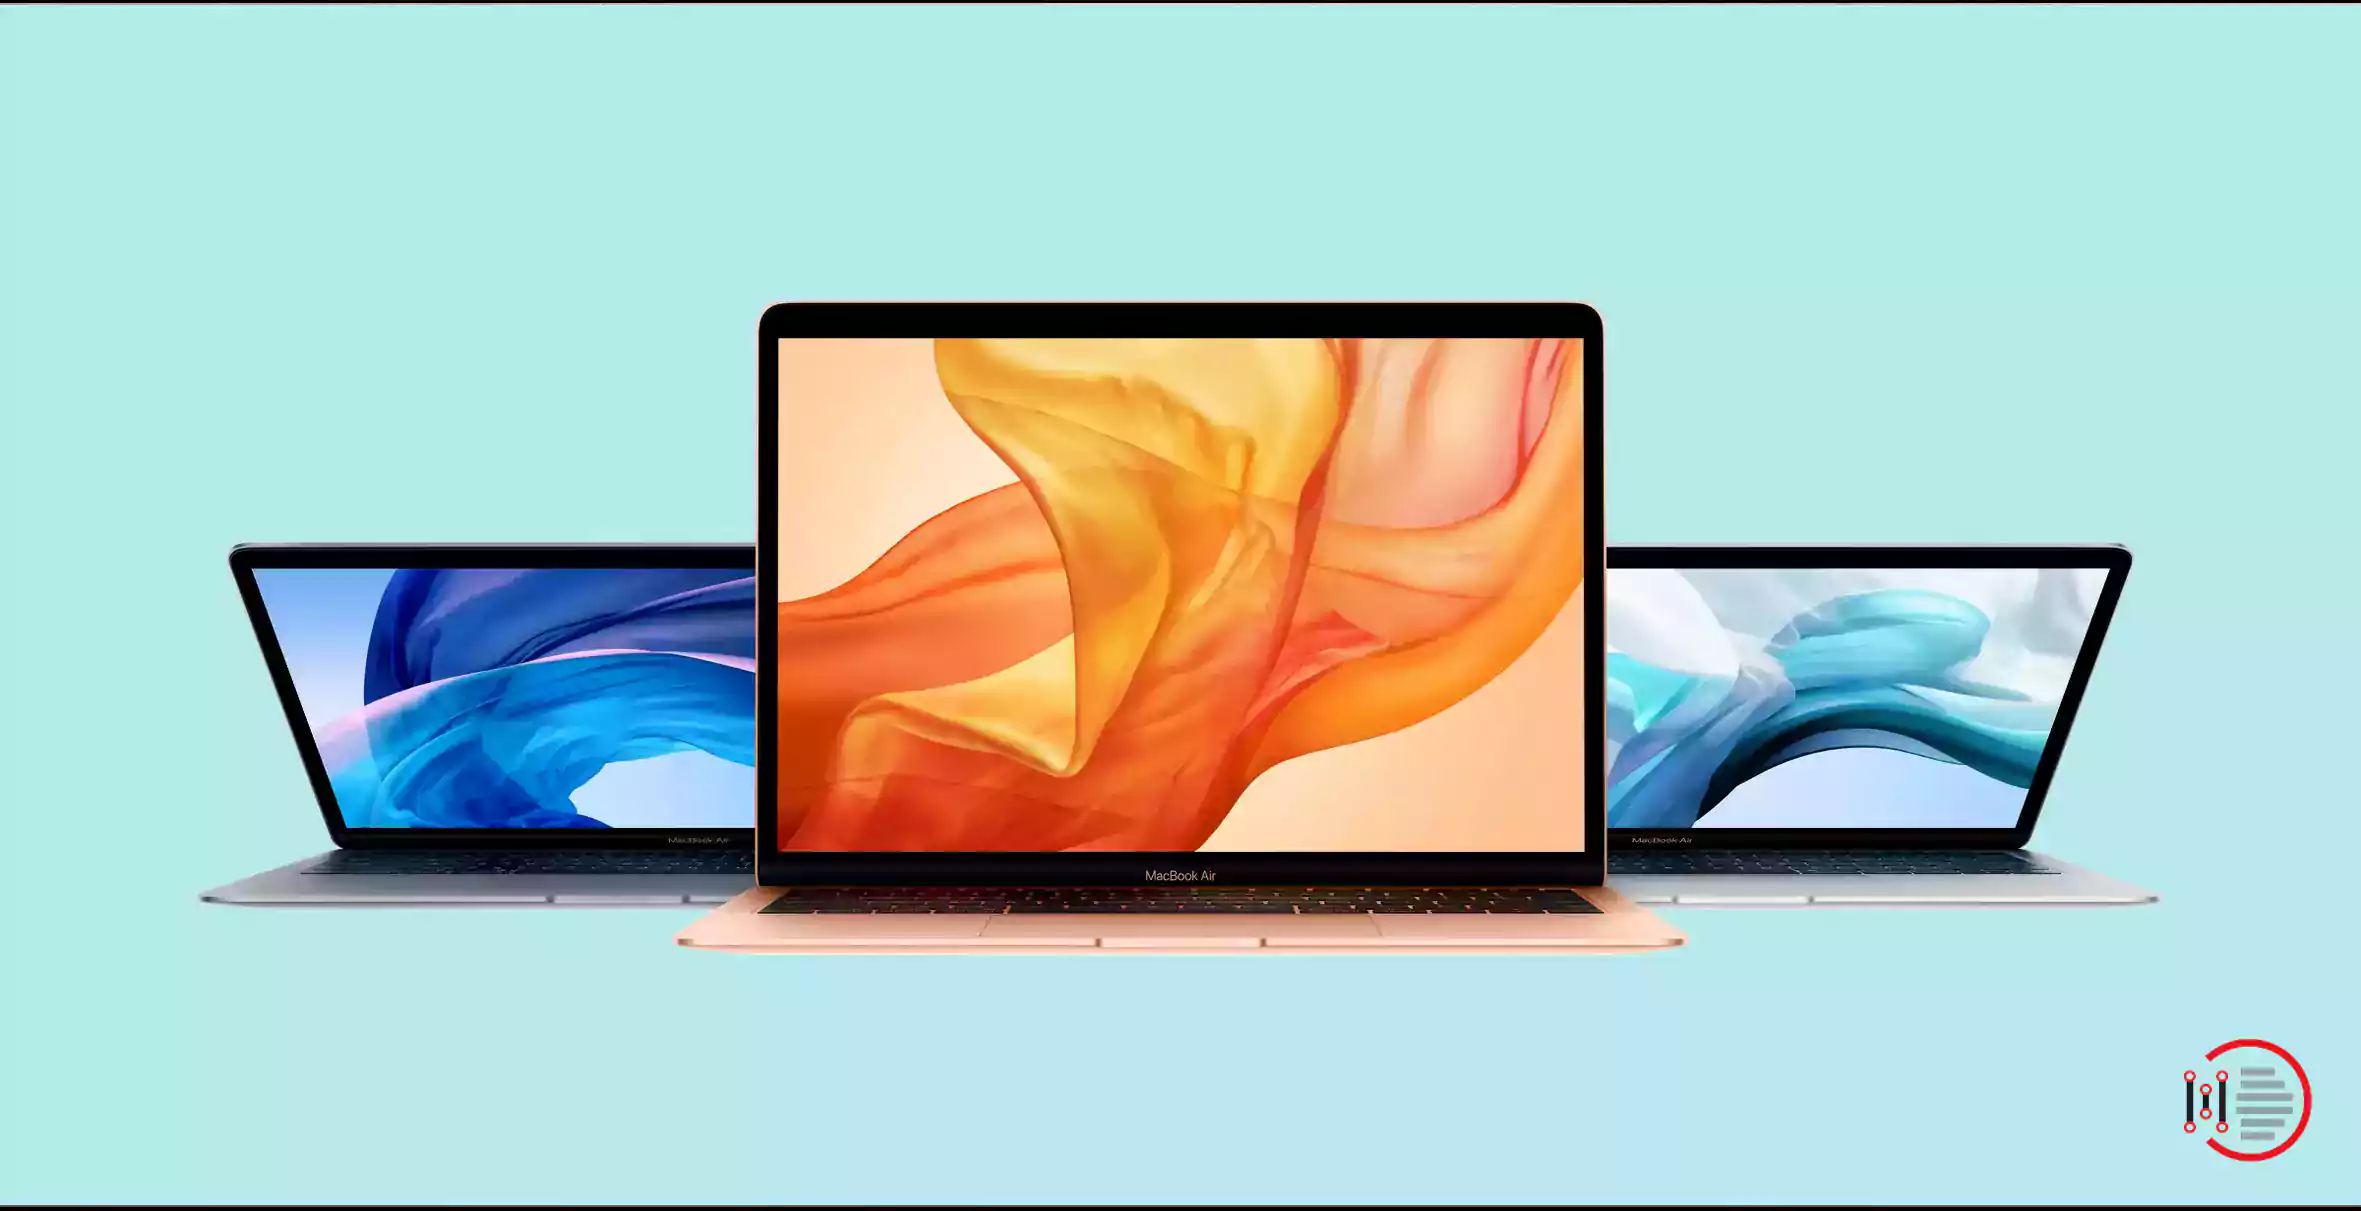 Replace the Battery or Buy a New MacBook